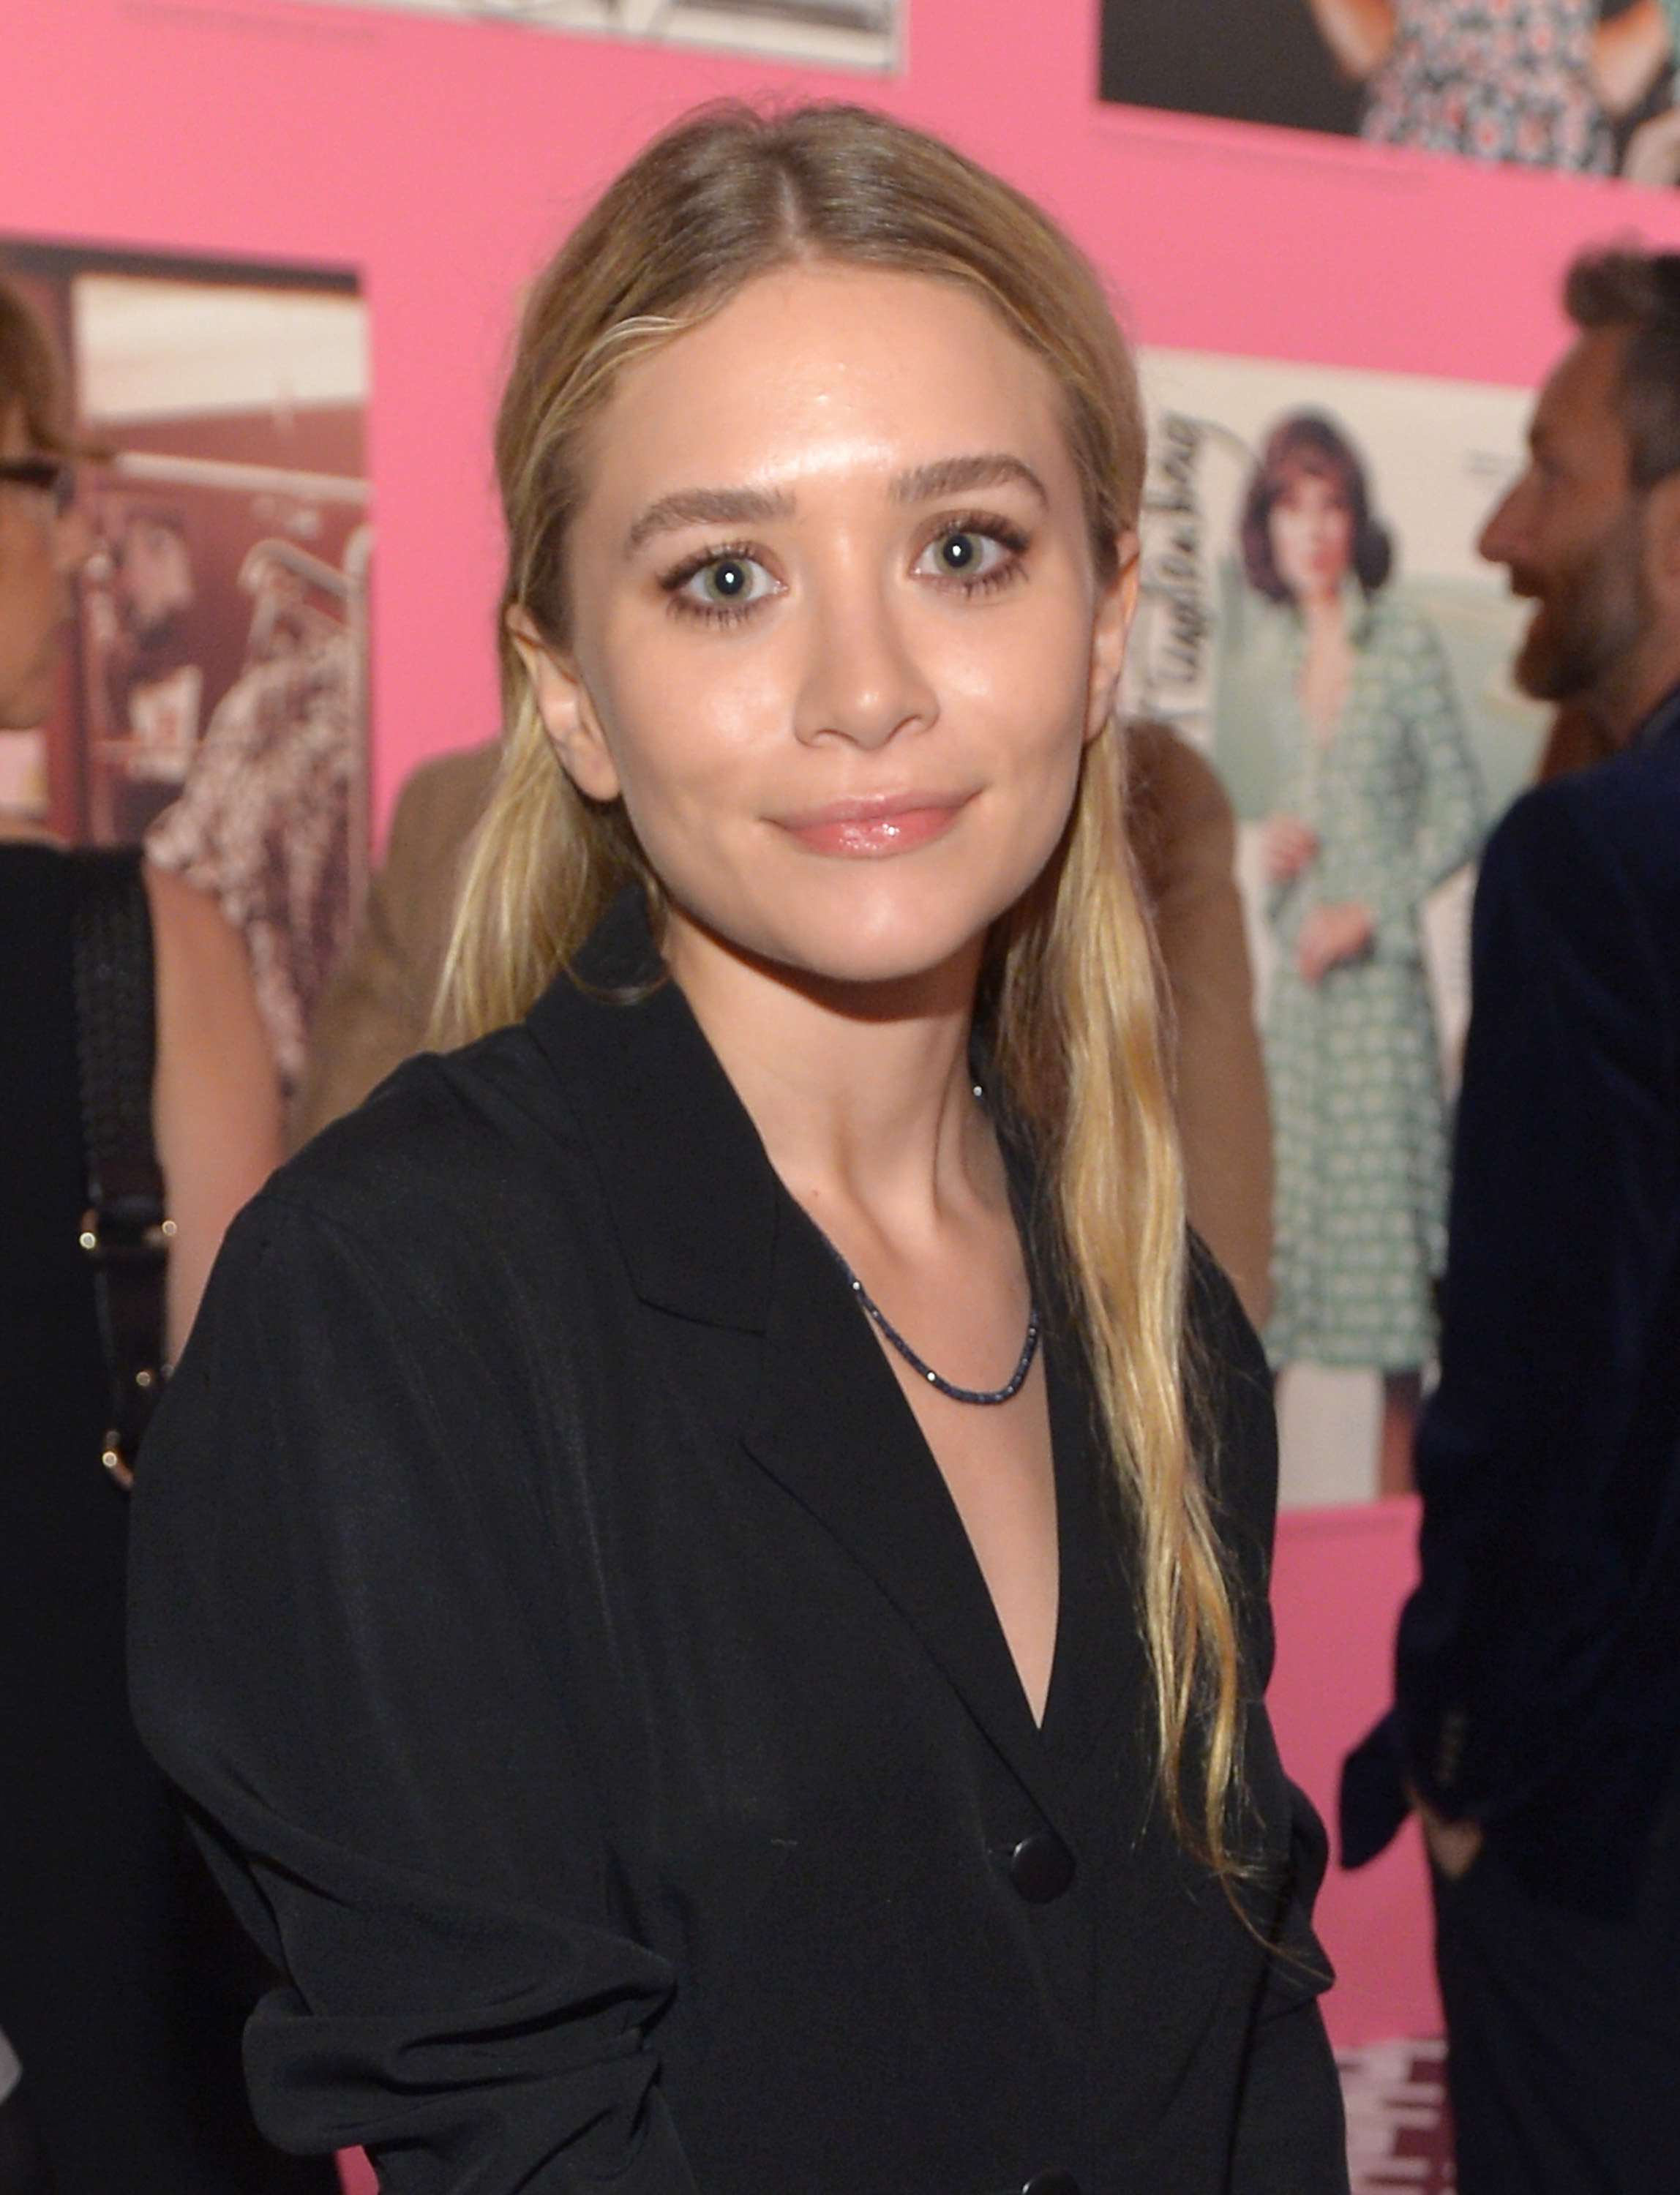 MaryKate Olsen Net Worth Once Again In The Spotlight With New Alleged